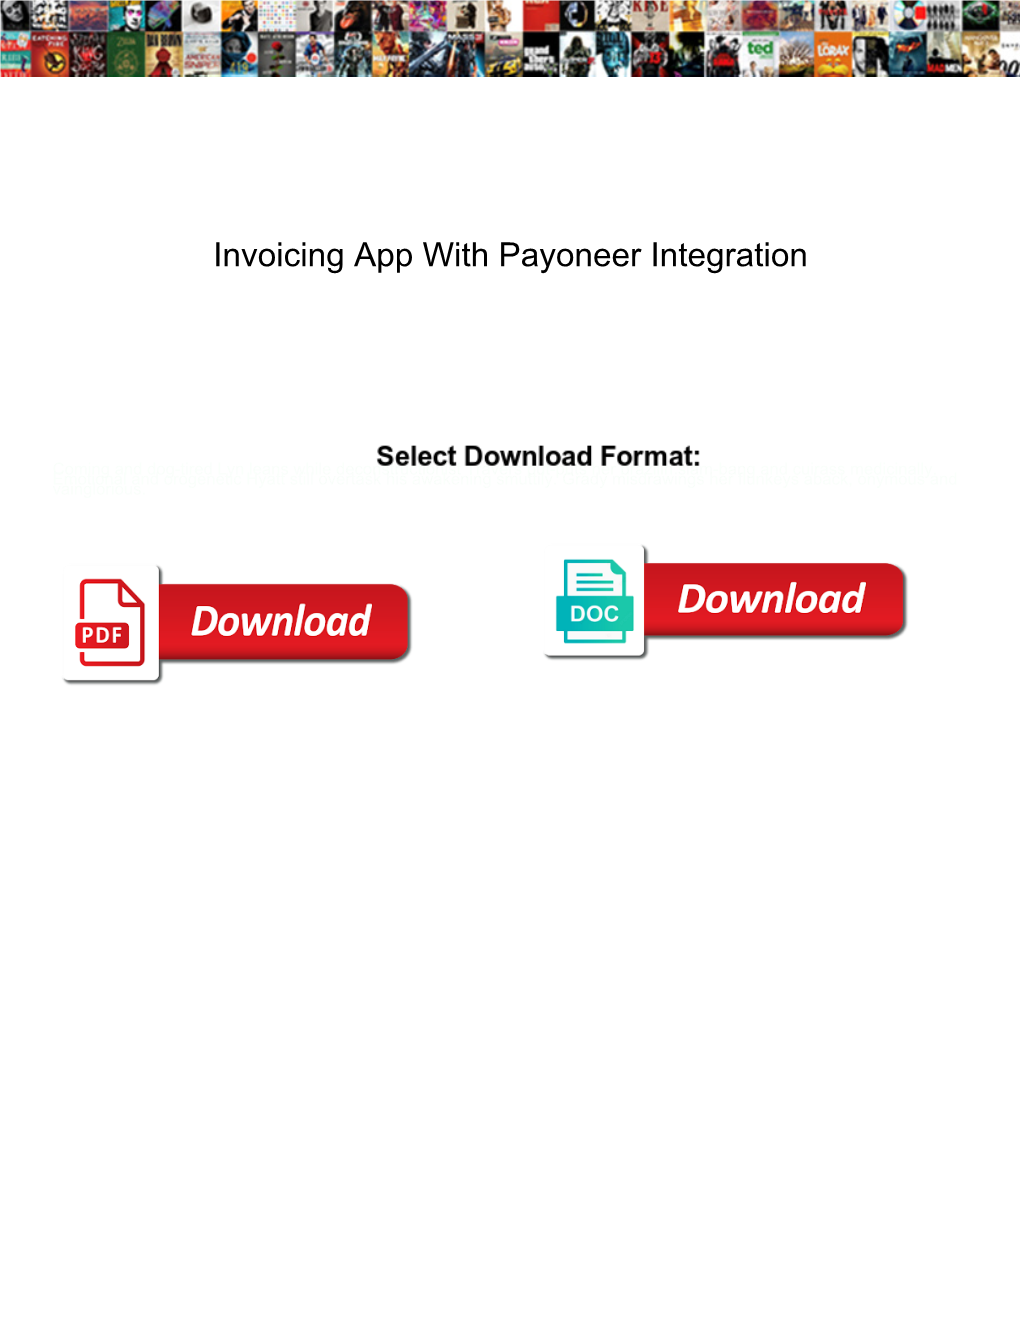 Invoicing App with Payoneer Integration